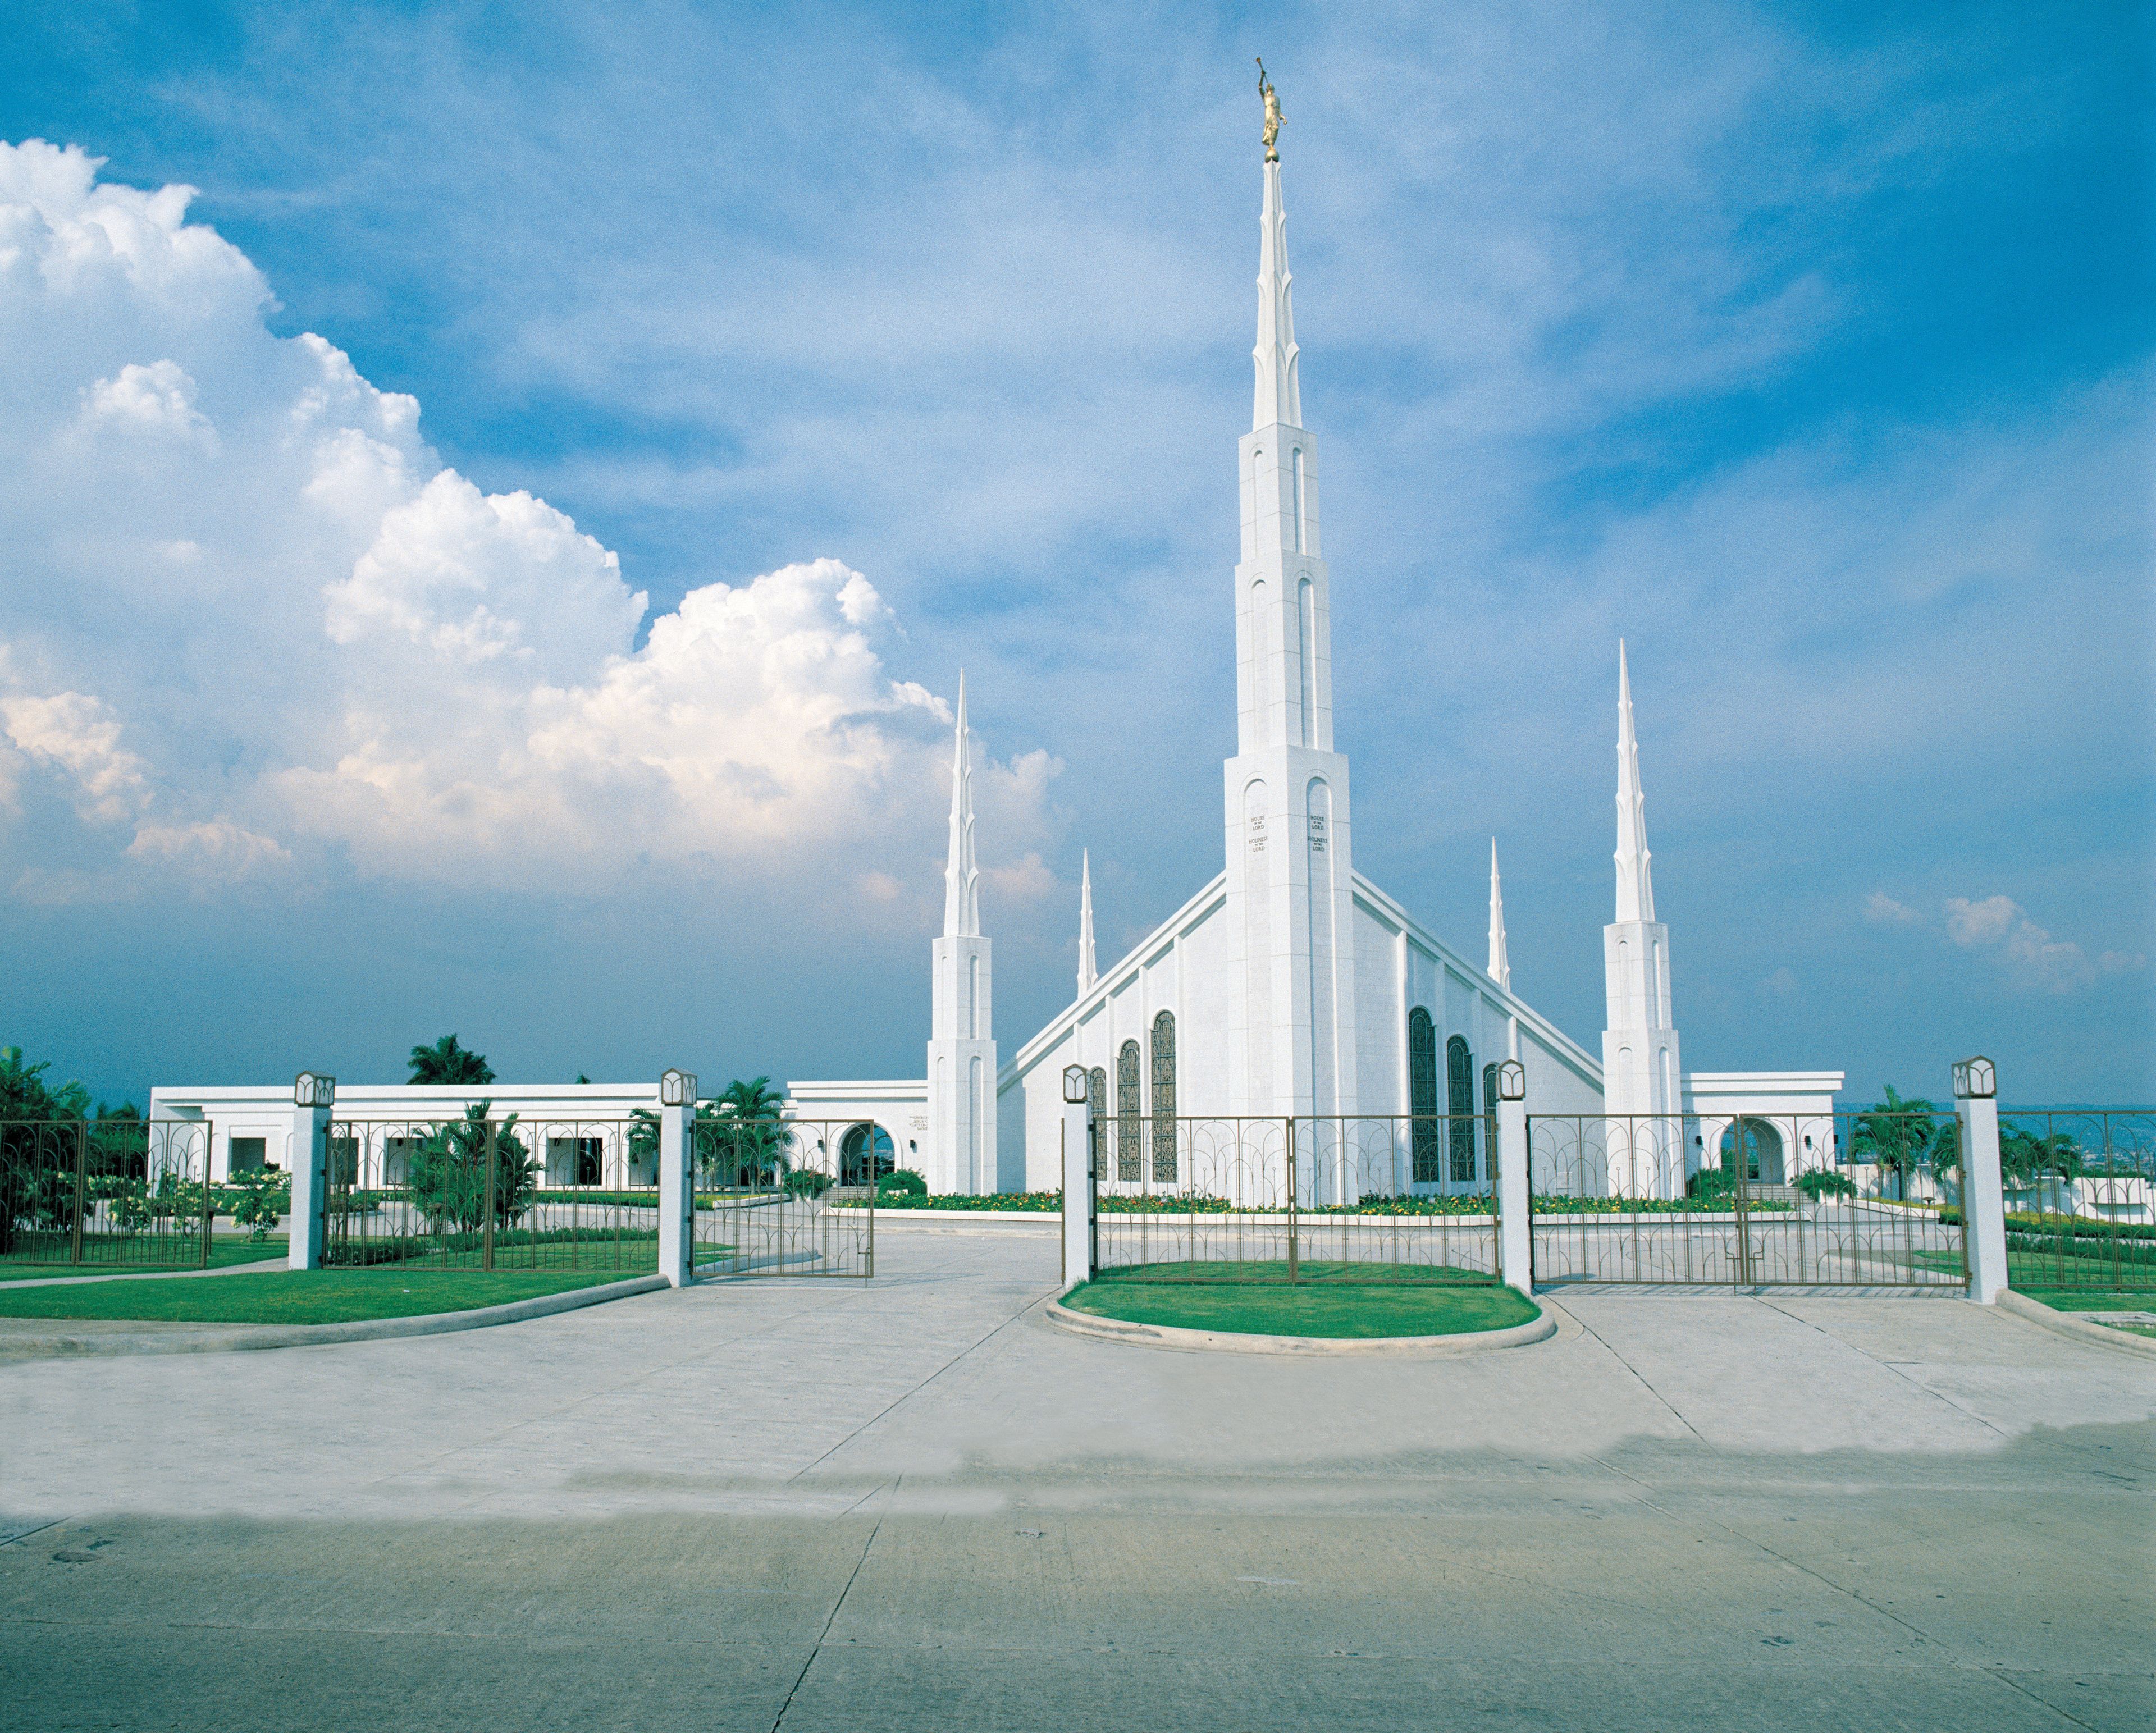 The entire Manila Philippines Temple, including the entrance and scenery.